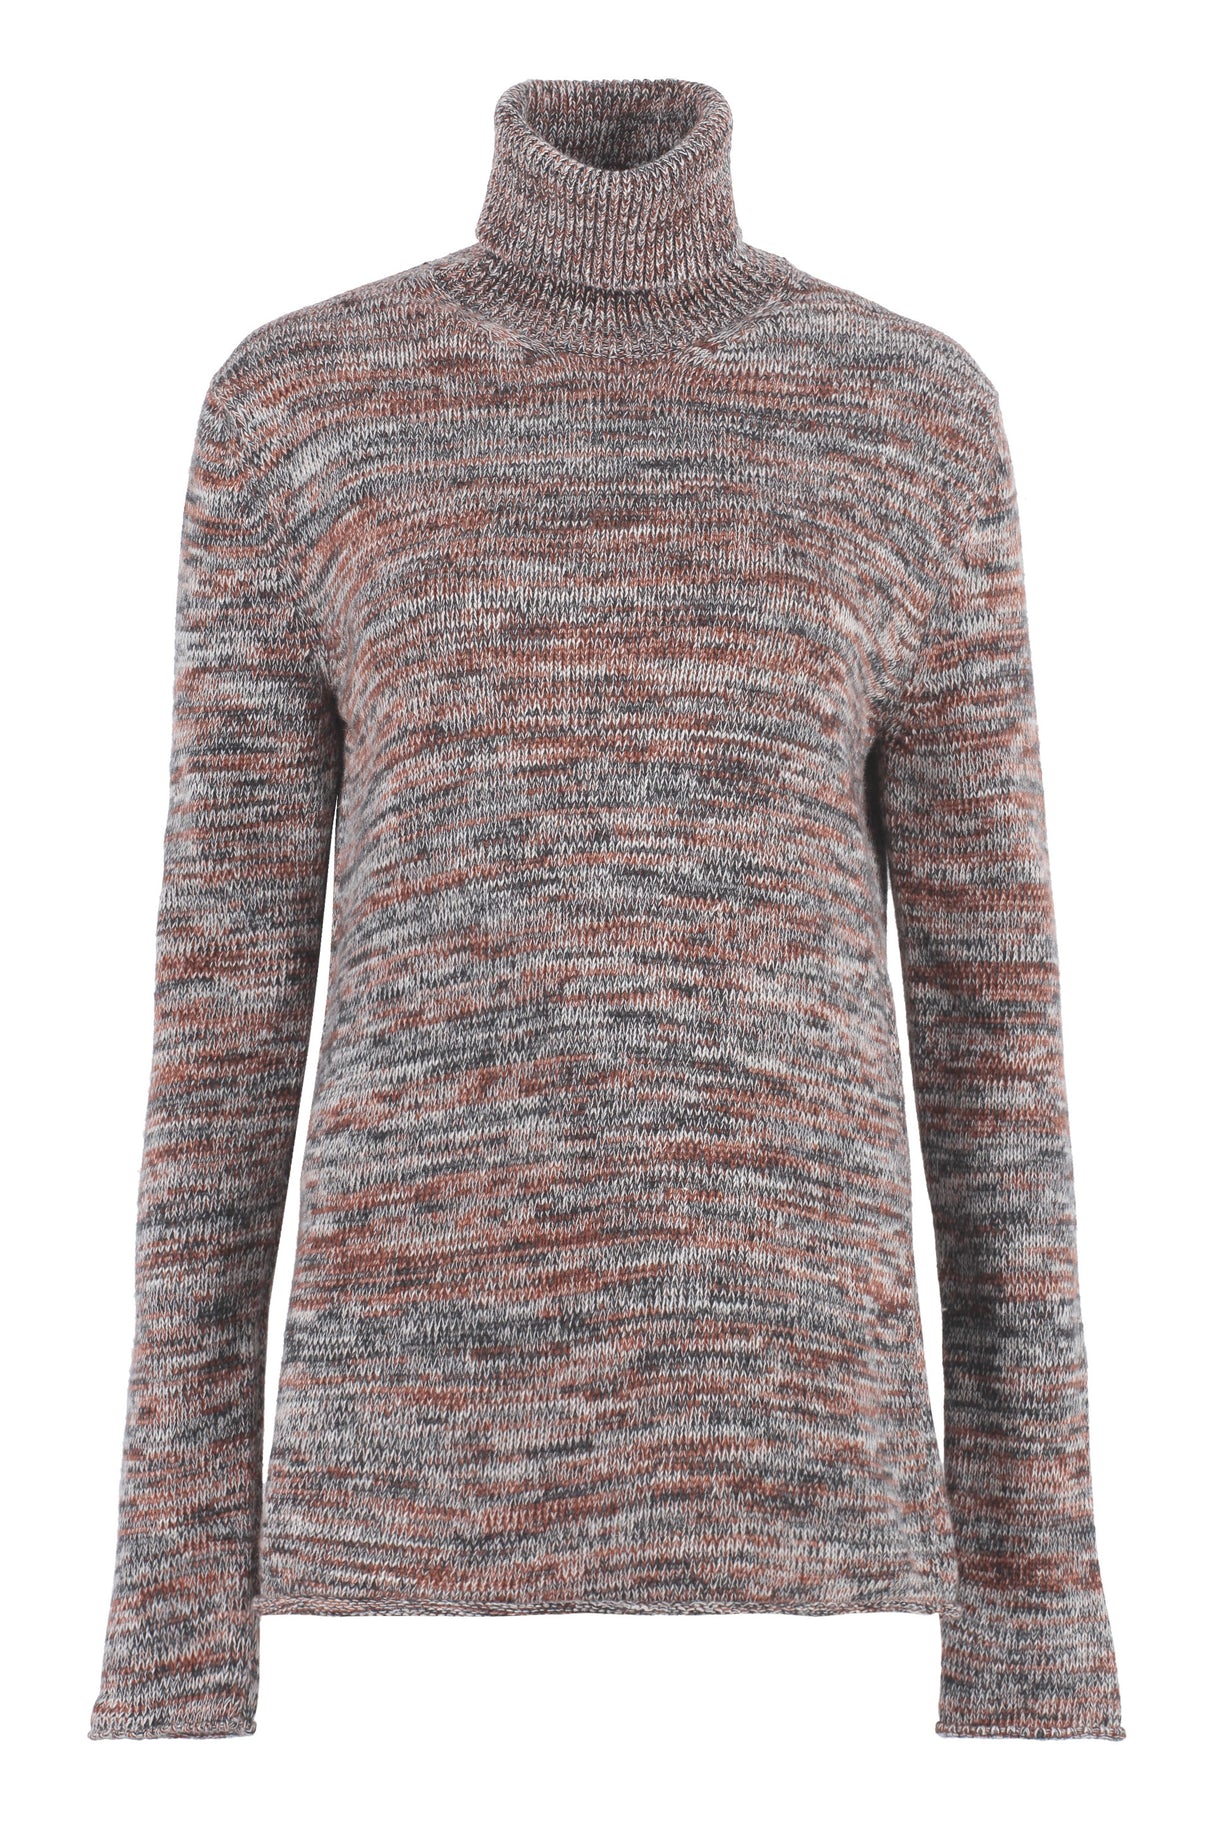 CHLOÉ Women's Multicolor Wool and Cashmere Sweater for FW22